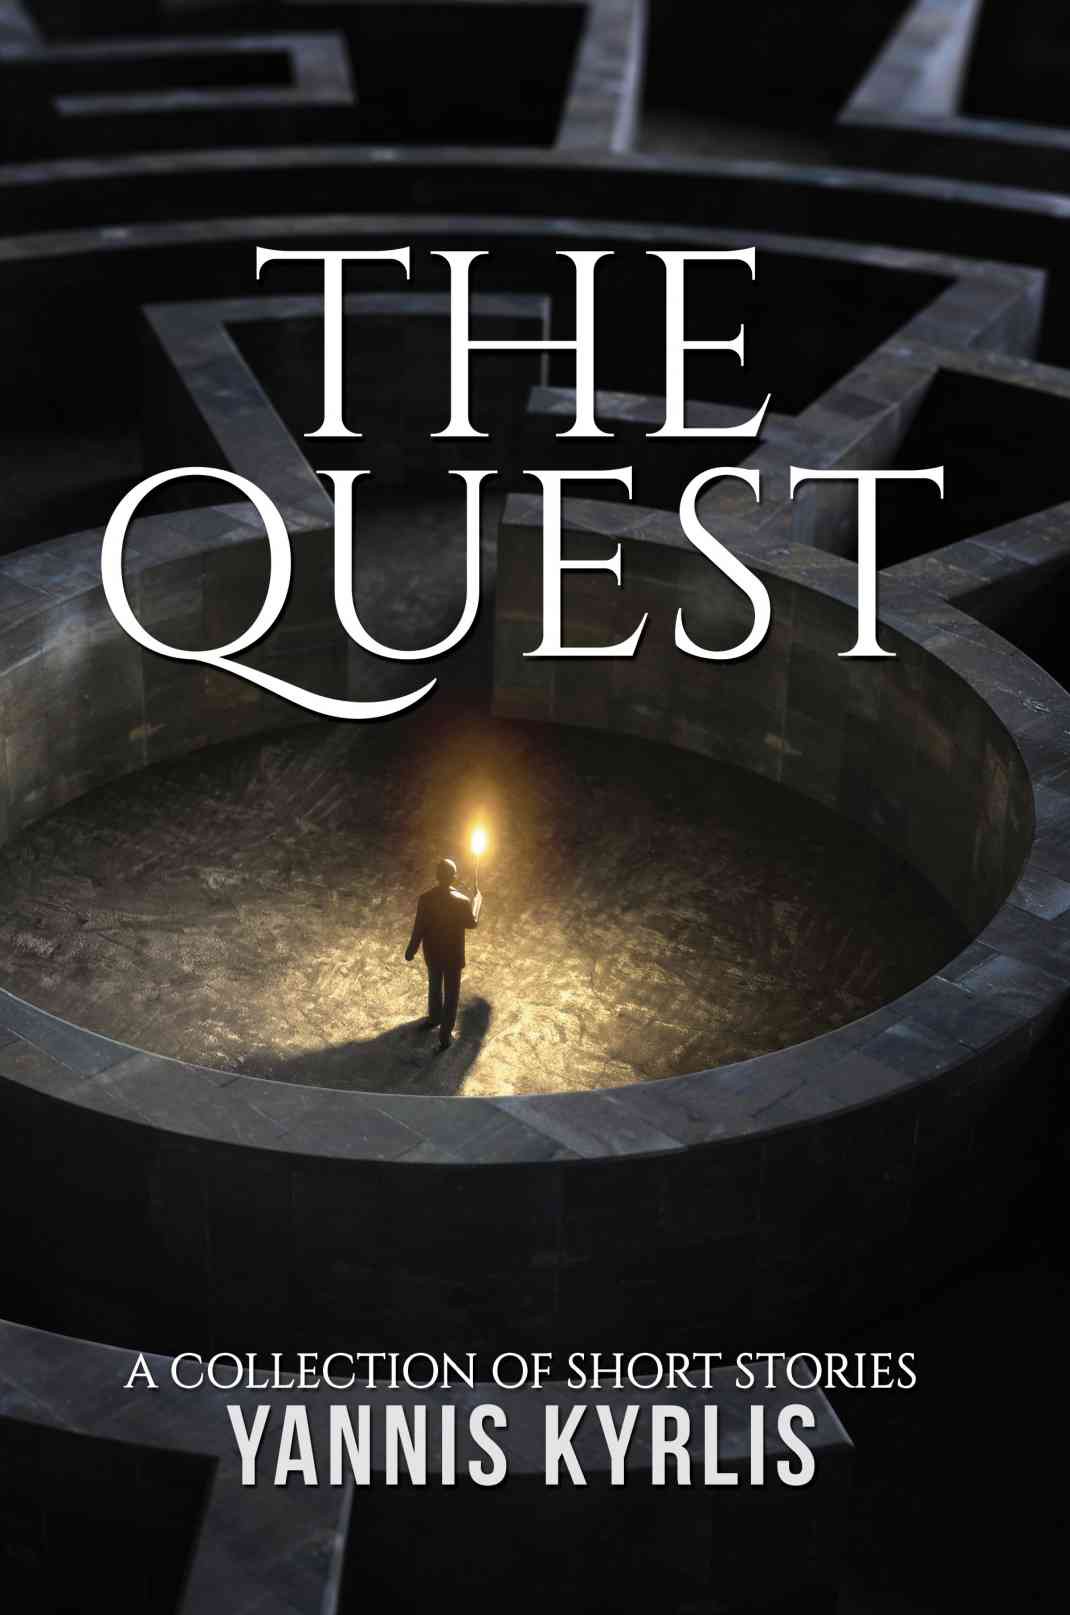 Review calls ‘The Quest’ a “Beautiful Collection” of Stories